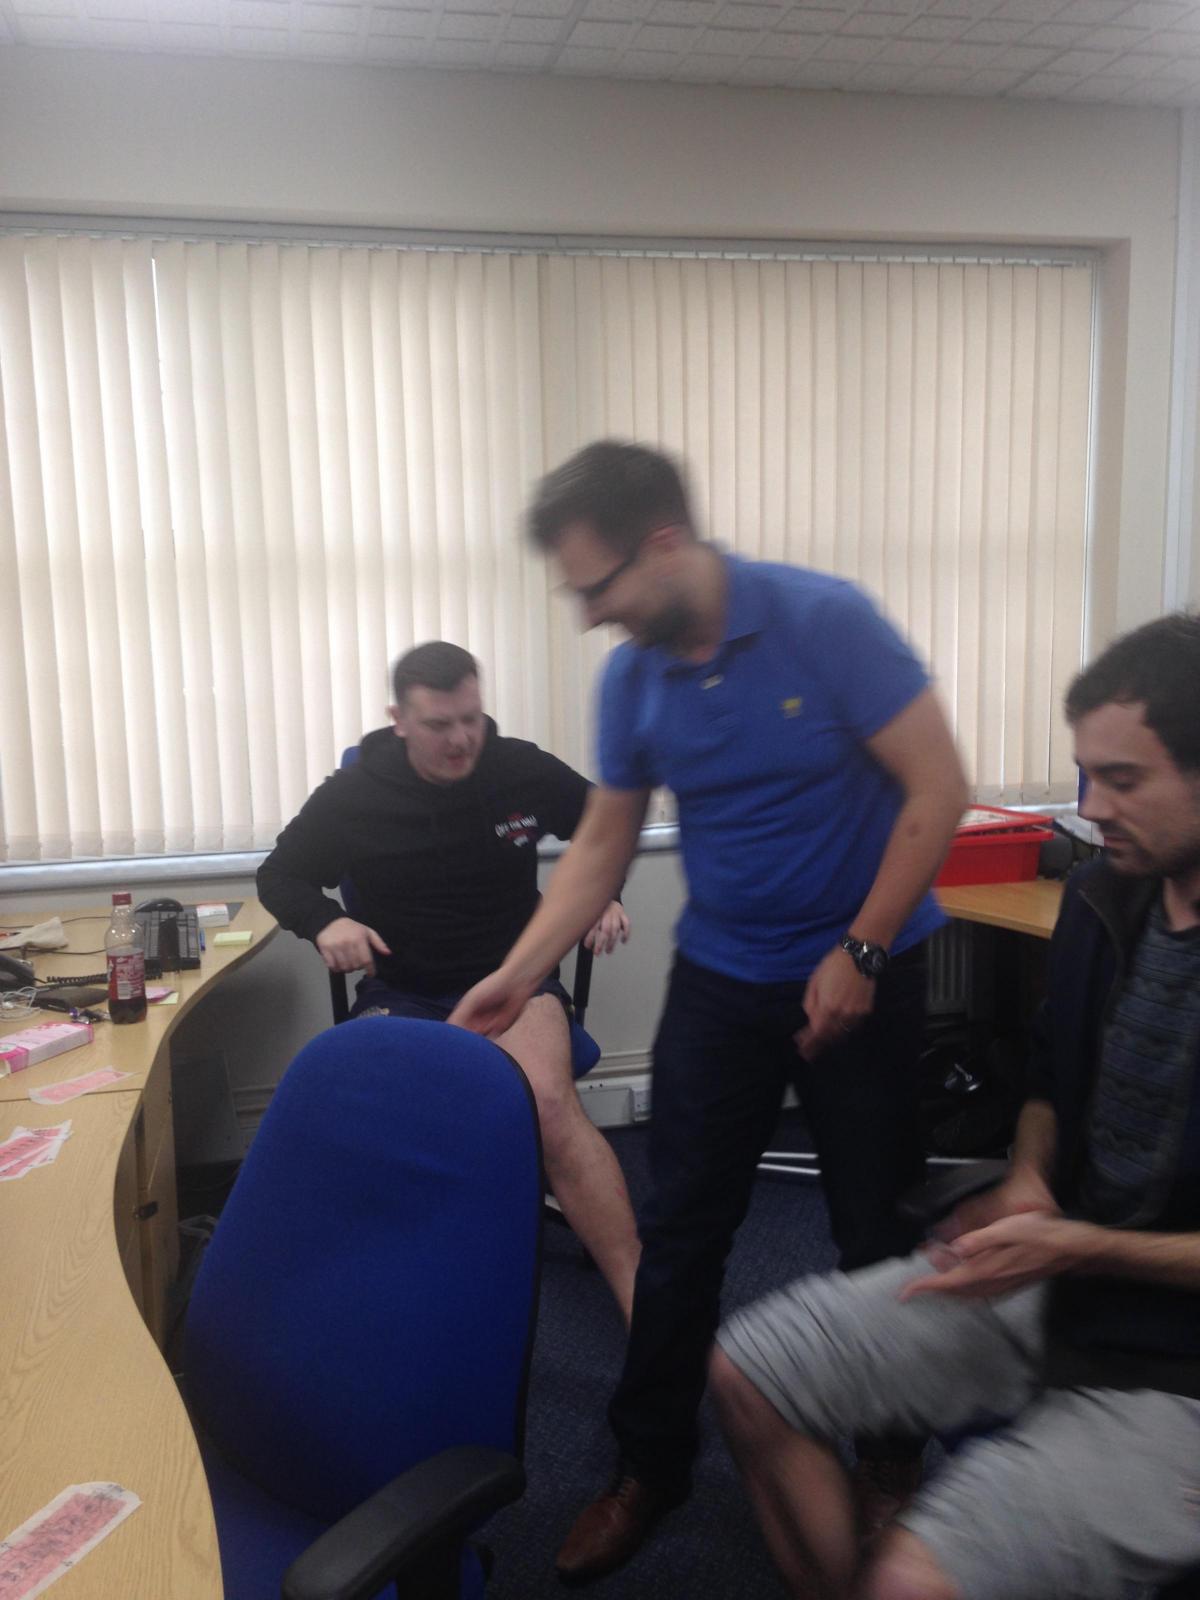 Staff members James Crowther, Andrew Blezard and Paul Neville helped to raise £115 at Nexus Vehicle Management in Pudsey when they volunteered to have their legs waxed for Comic Relief. Overall staff raised £400, which will be matched by the company.